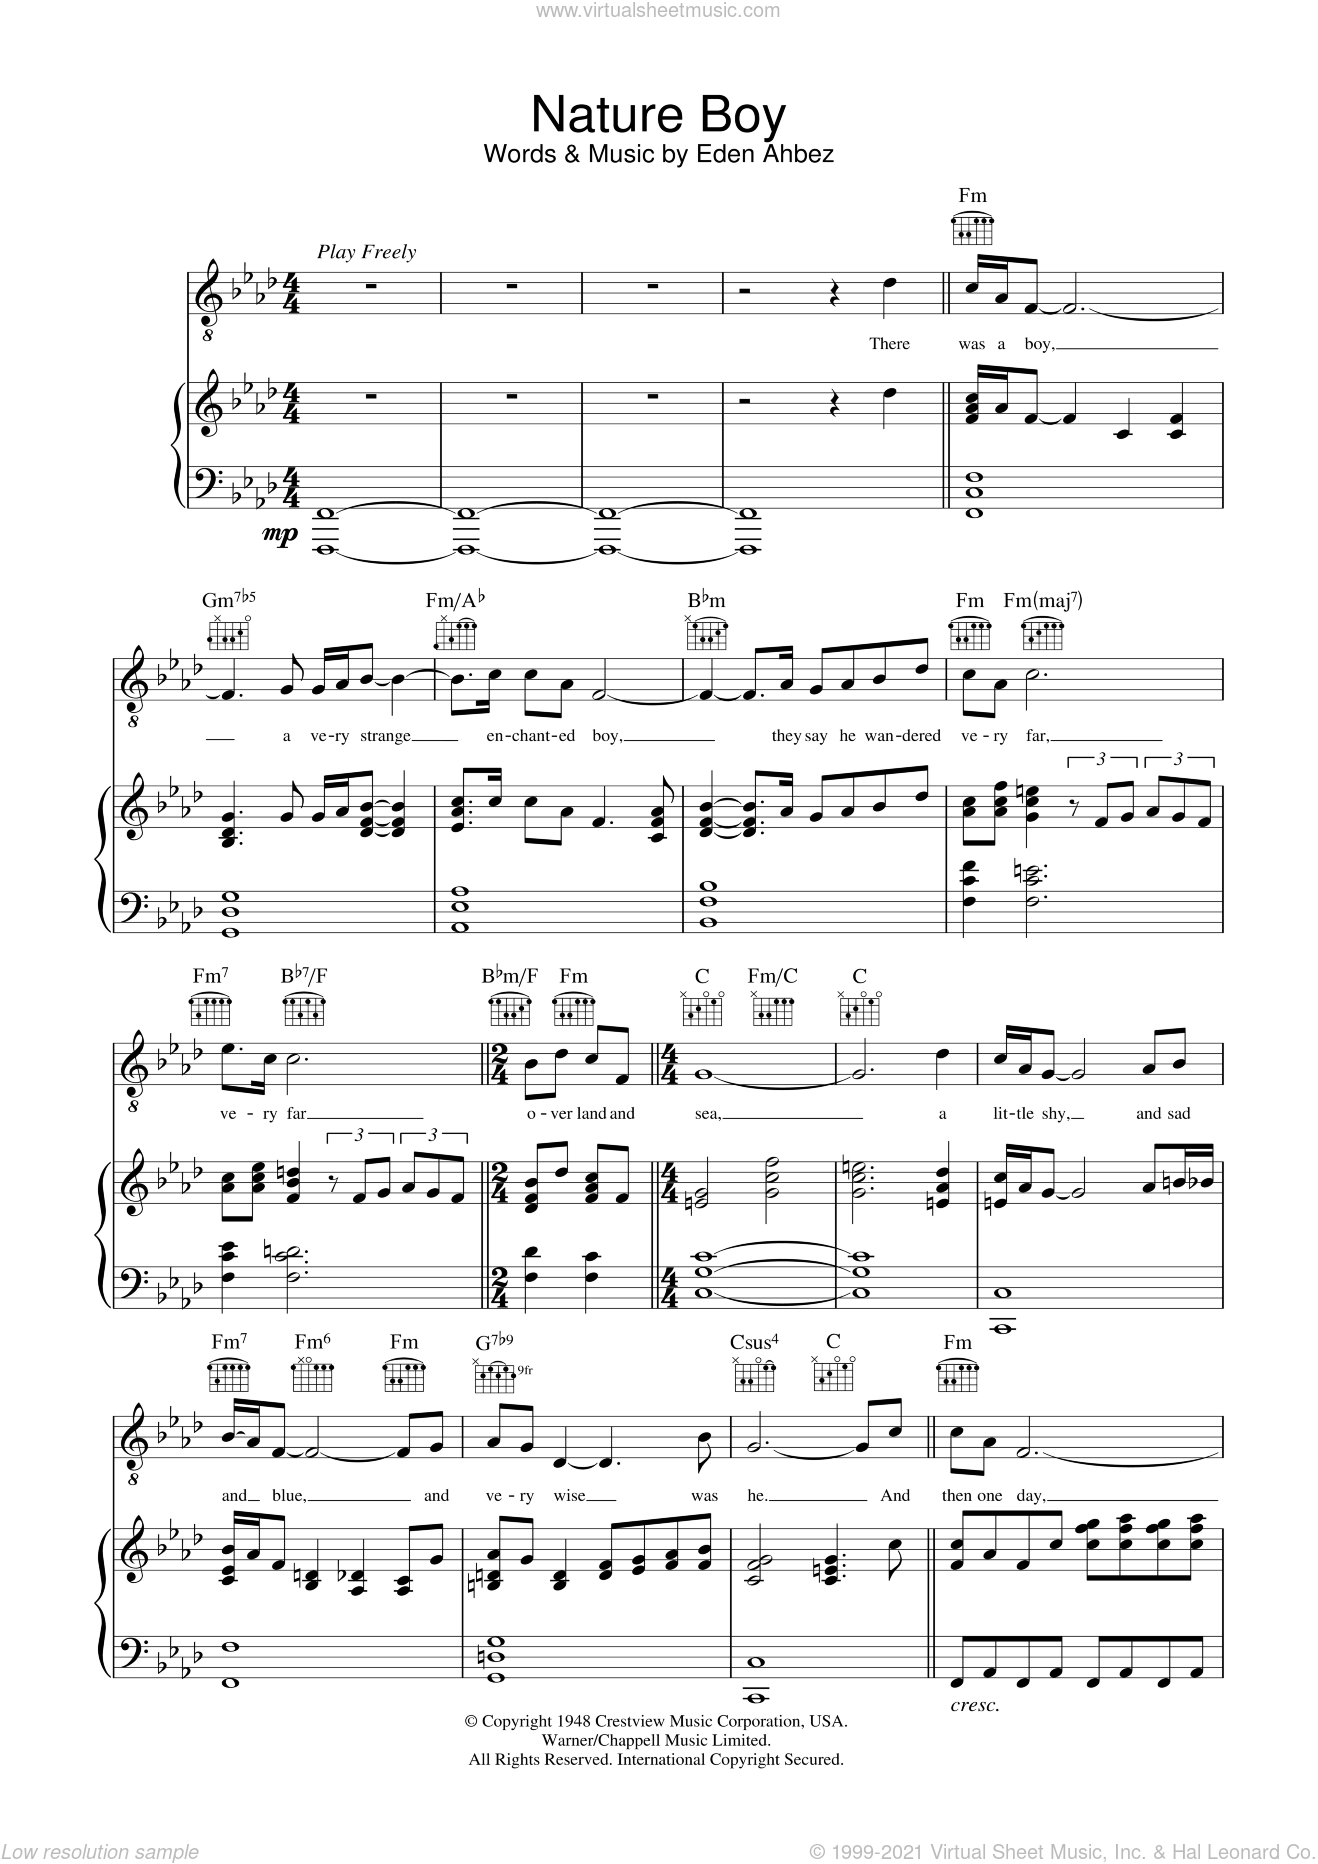 Cole Nature Boy sheet music voice, piano or guitar [PDF]